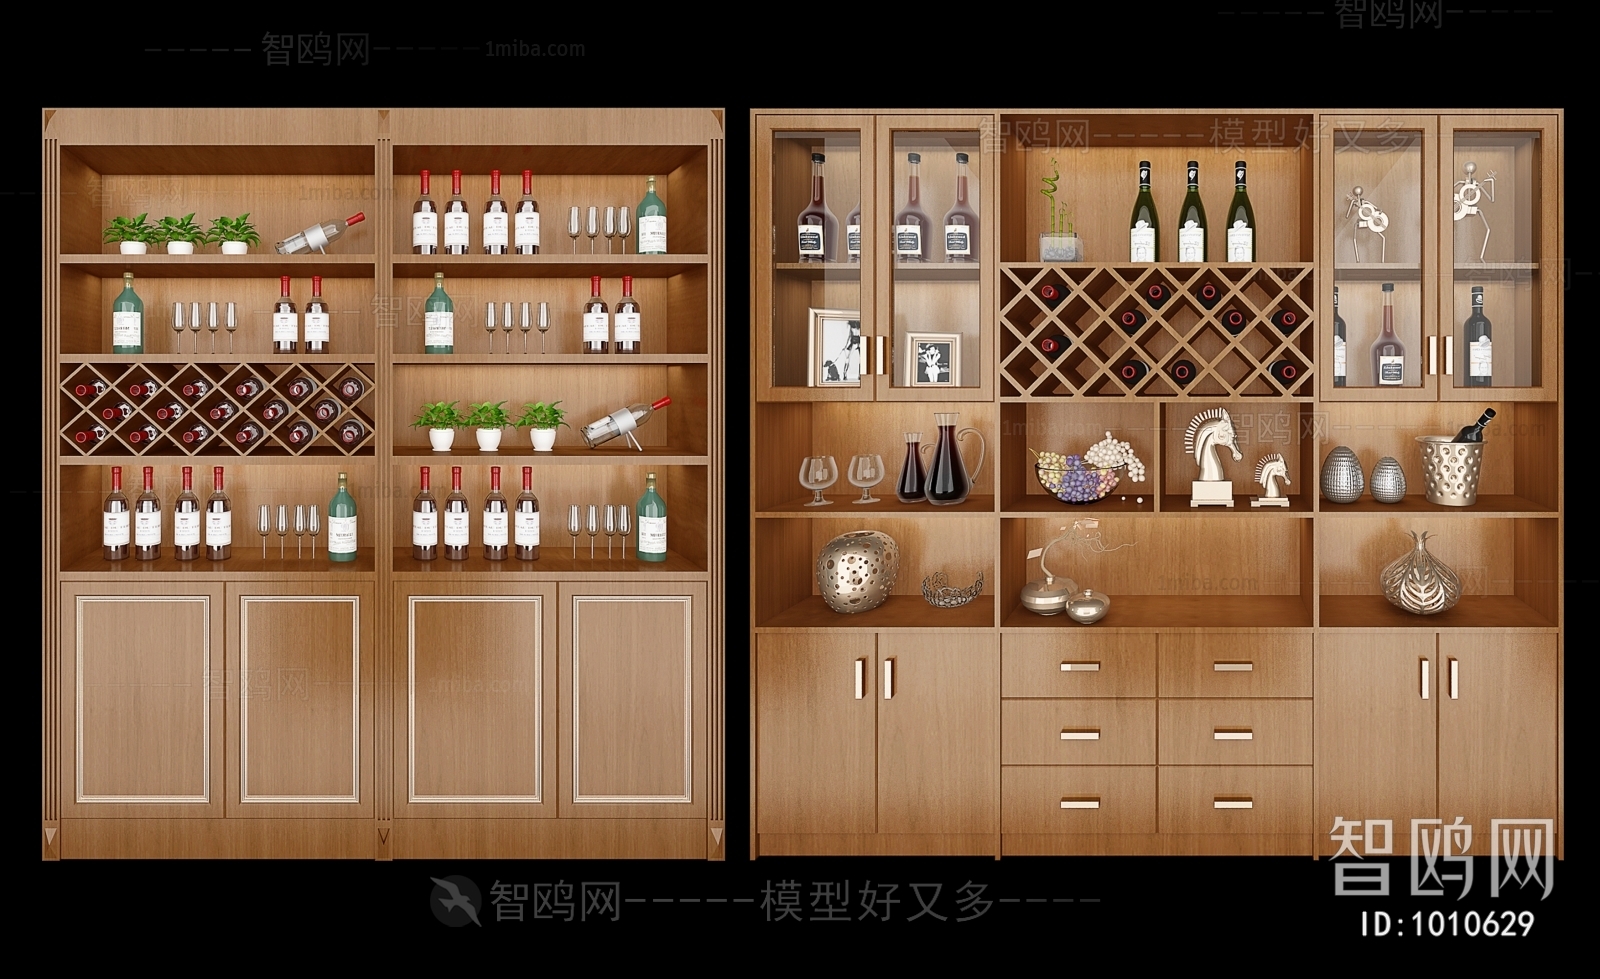 Chinese Style Wine Cabinet